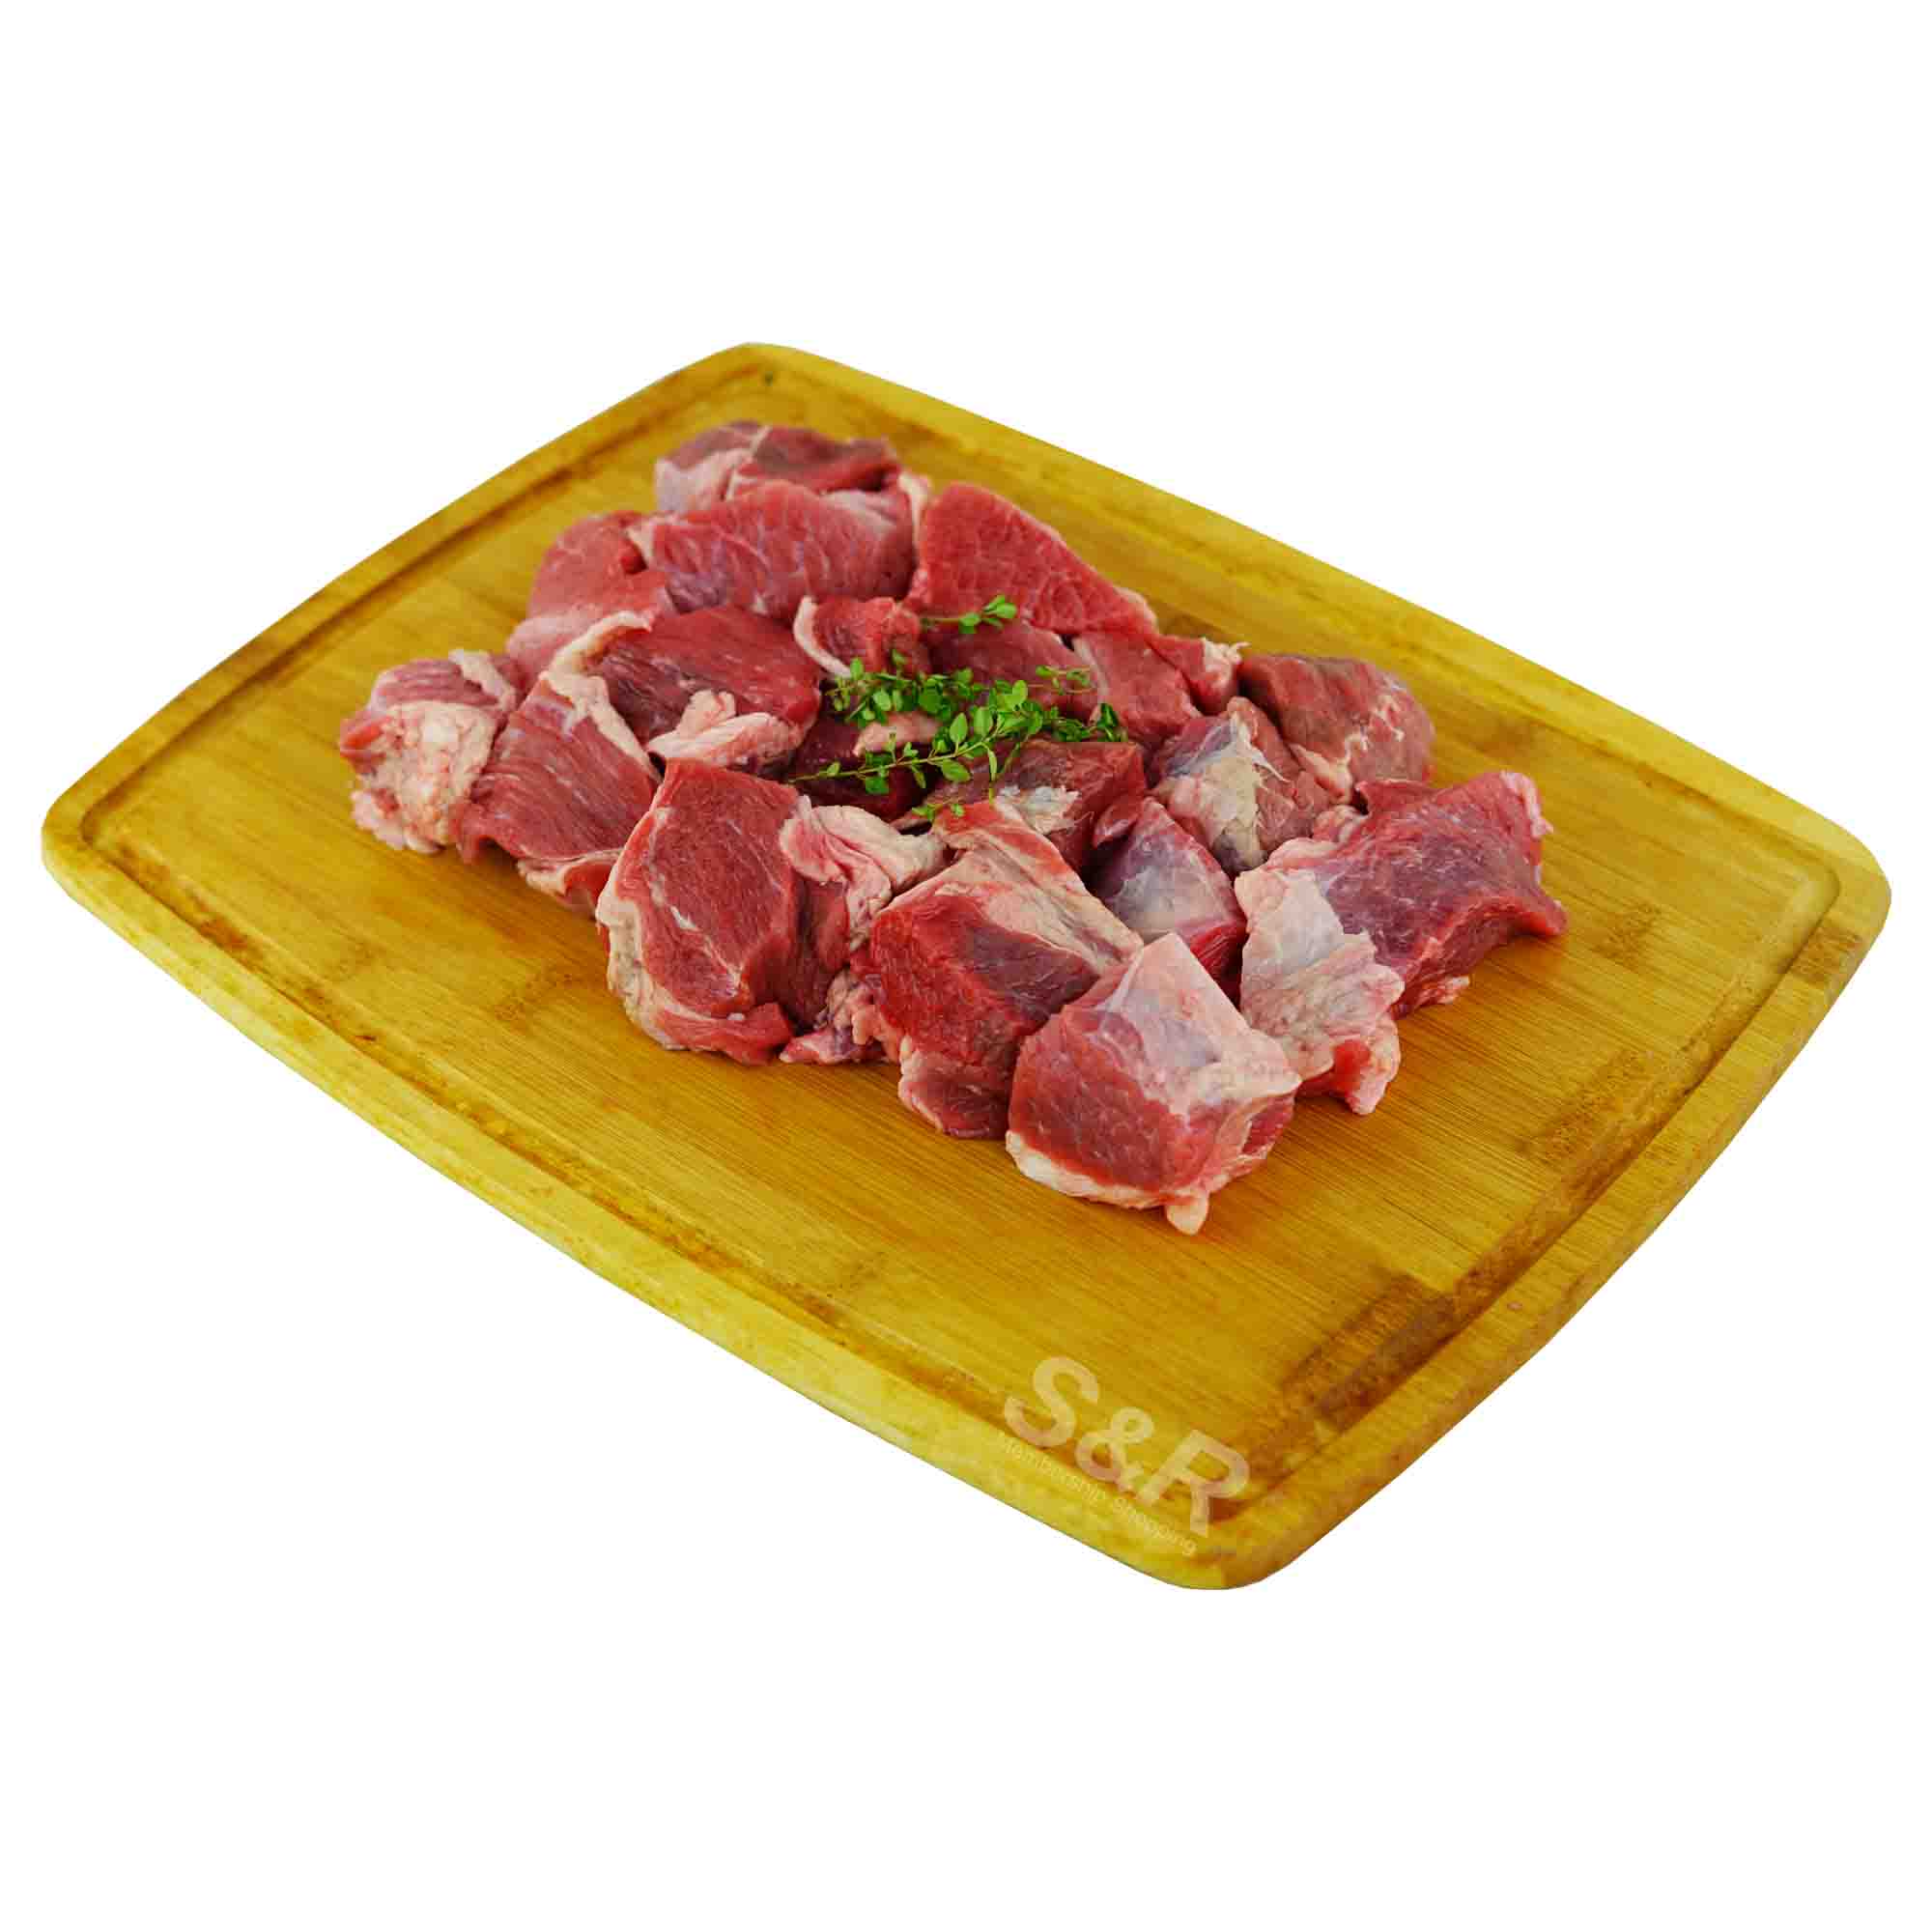 Members' Value Beef Cubes approx. 2kg